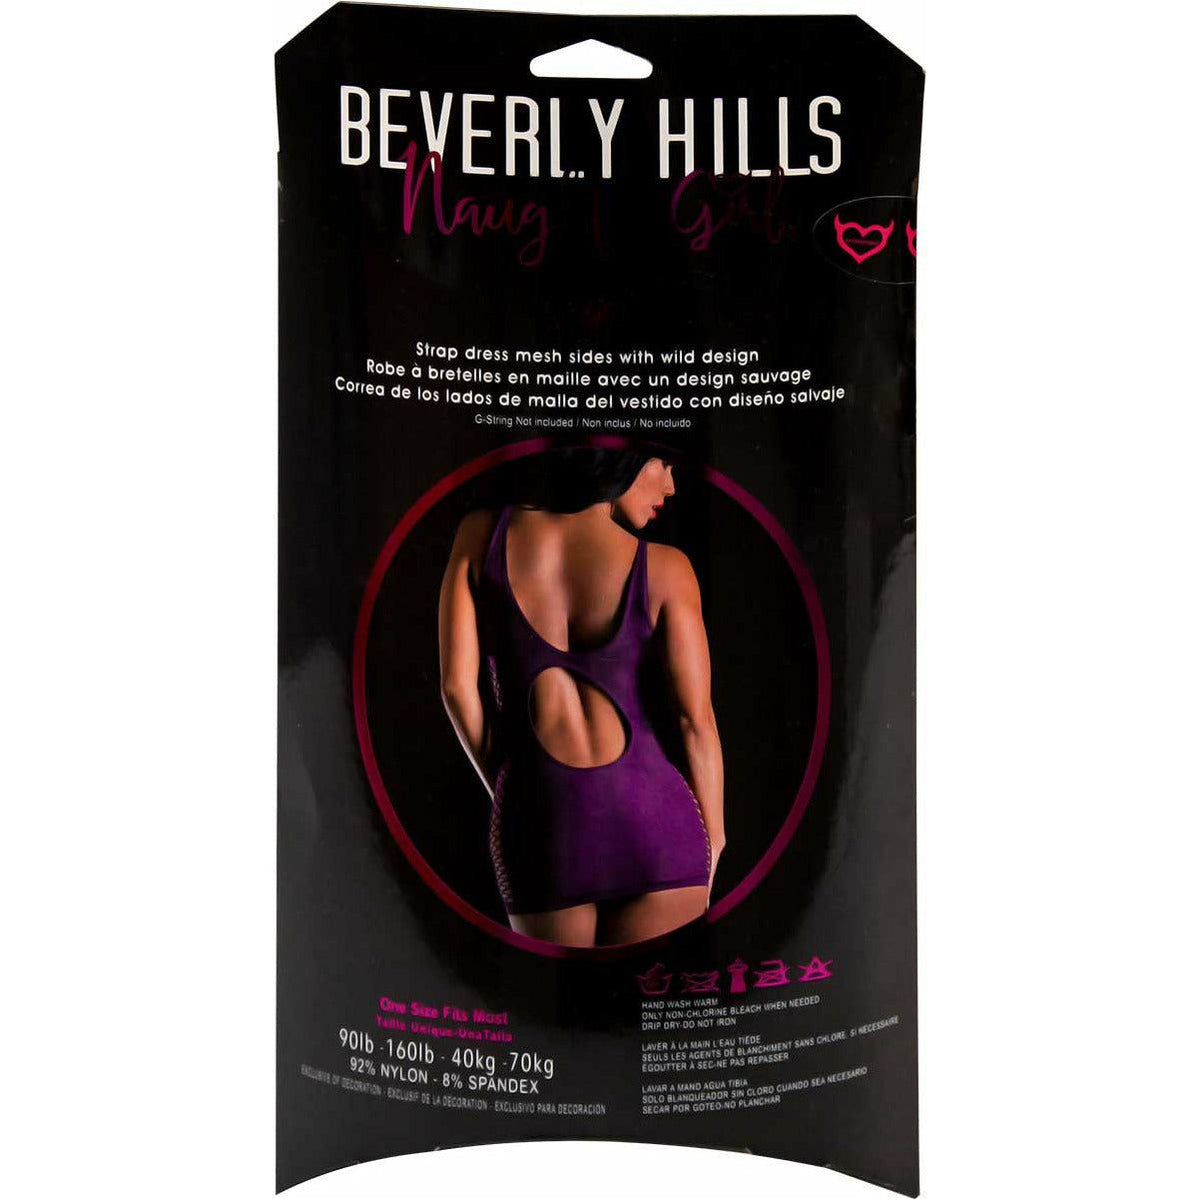 Beverly Hills Naughty Girl - Side Mesh Dress with Wild Design - Purple - One Size